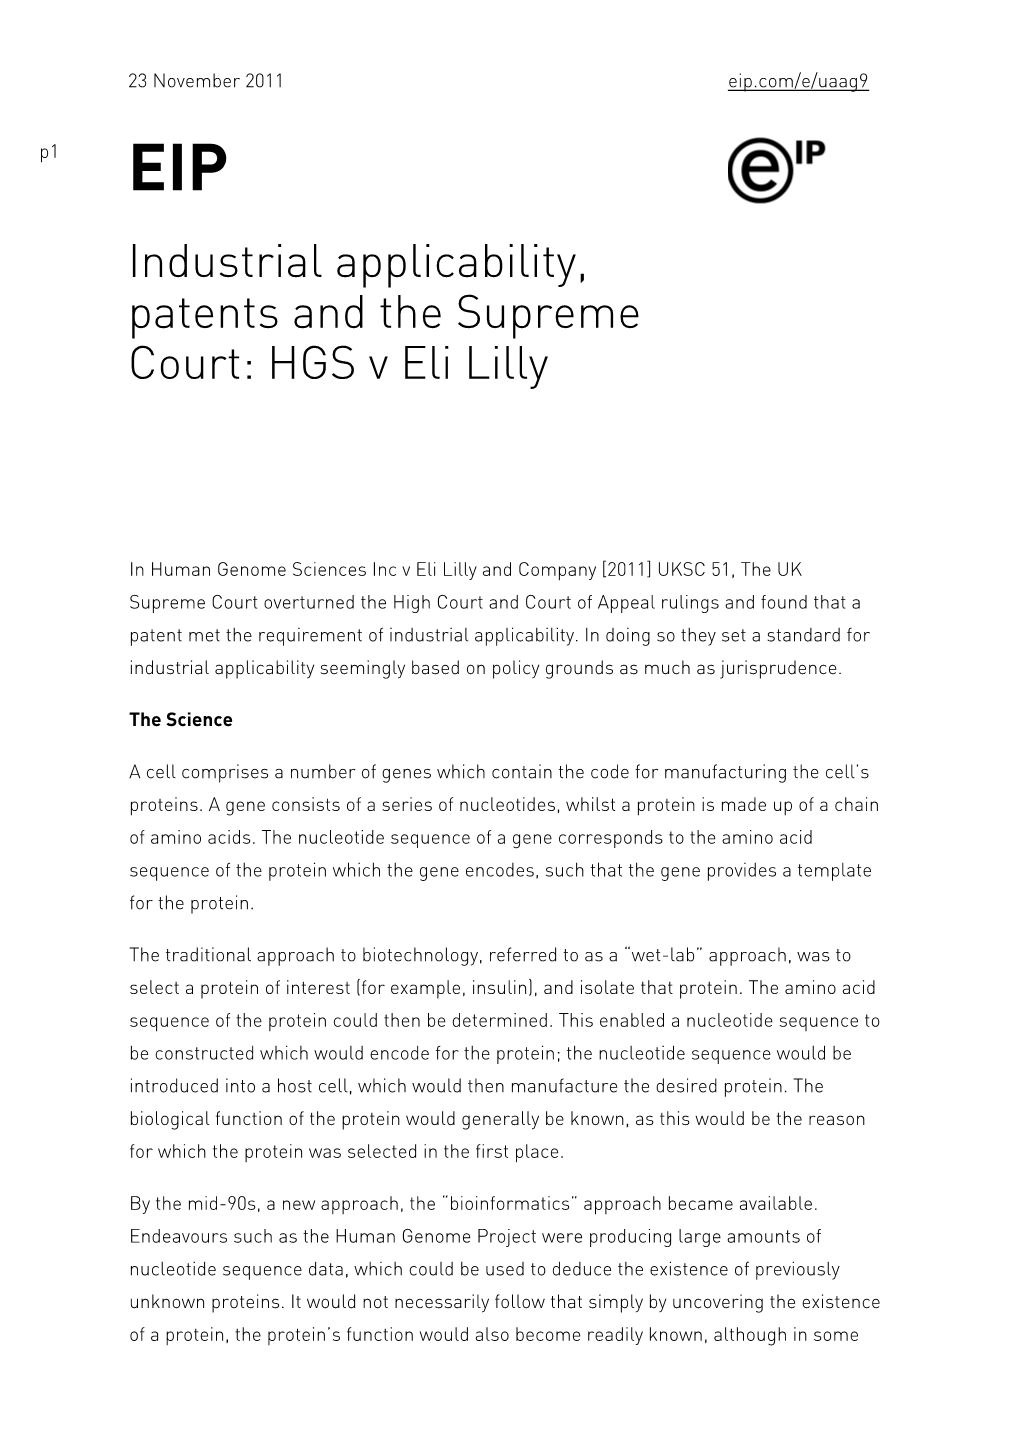 Industrial Applicability, Patents and the Supreme Court: HGS V Eli Lilly